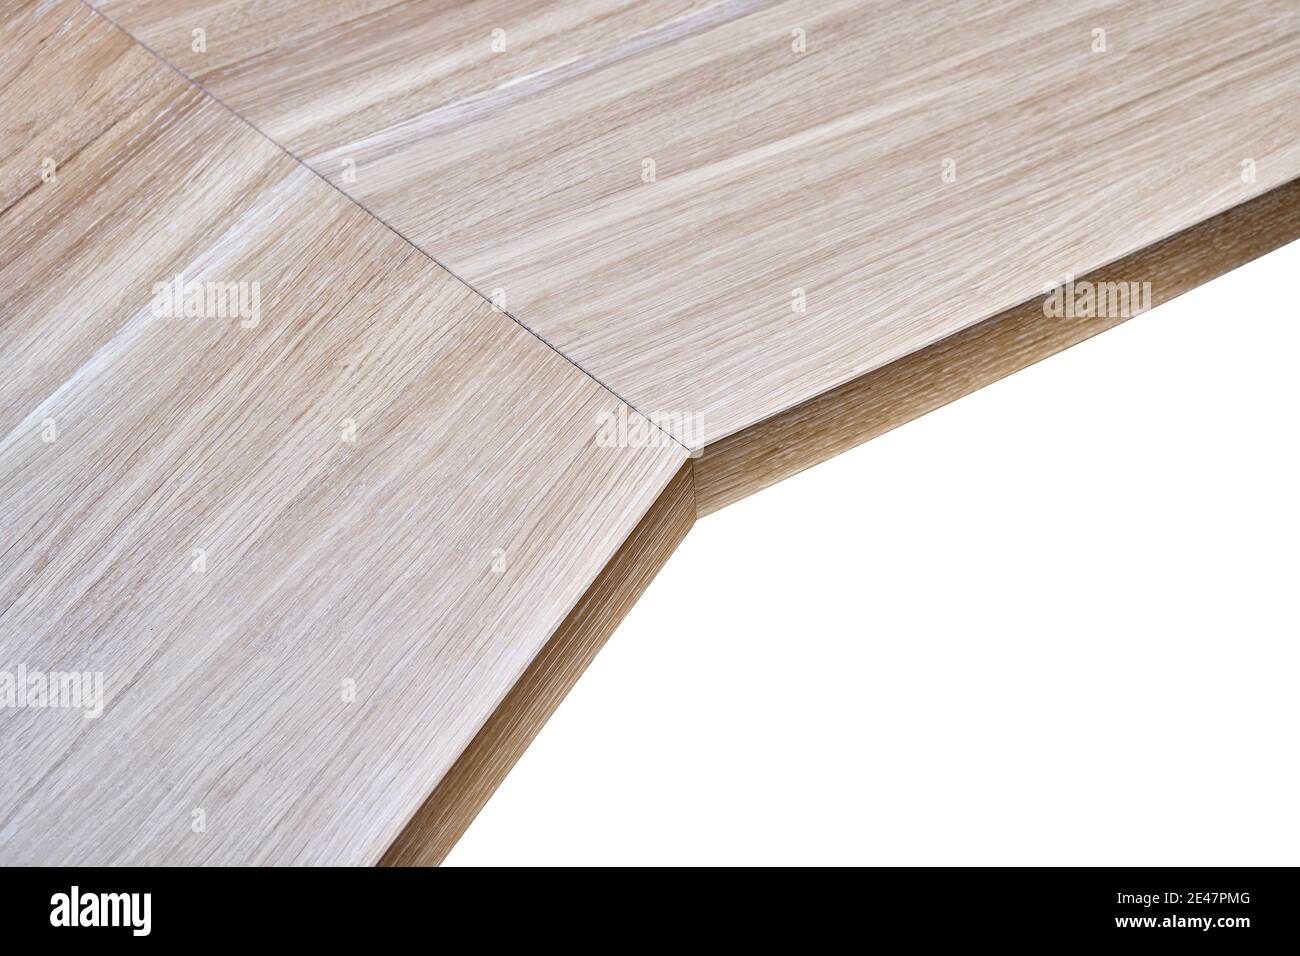 Elegant writing desk made with bleached solid oak timber against white background, upper view Stock Photo